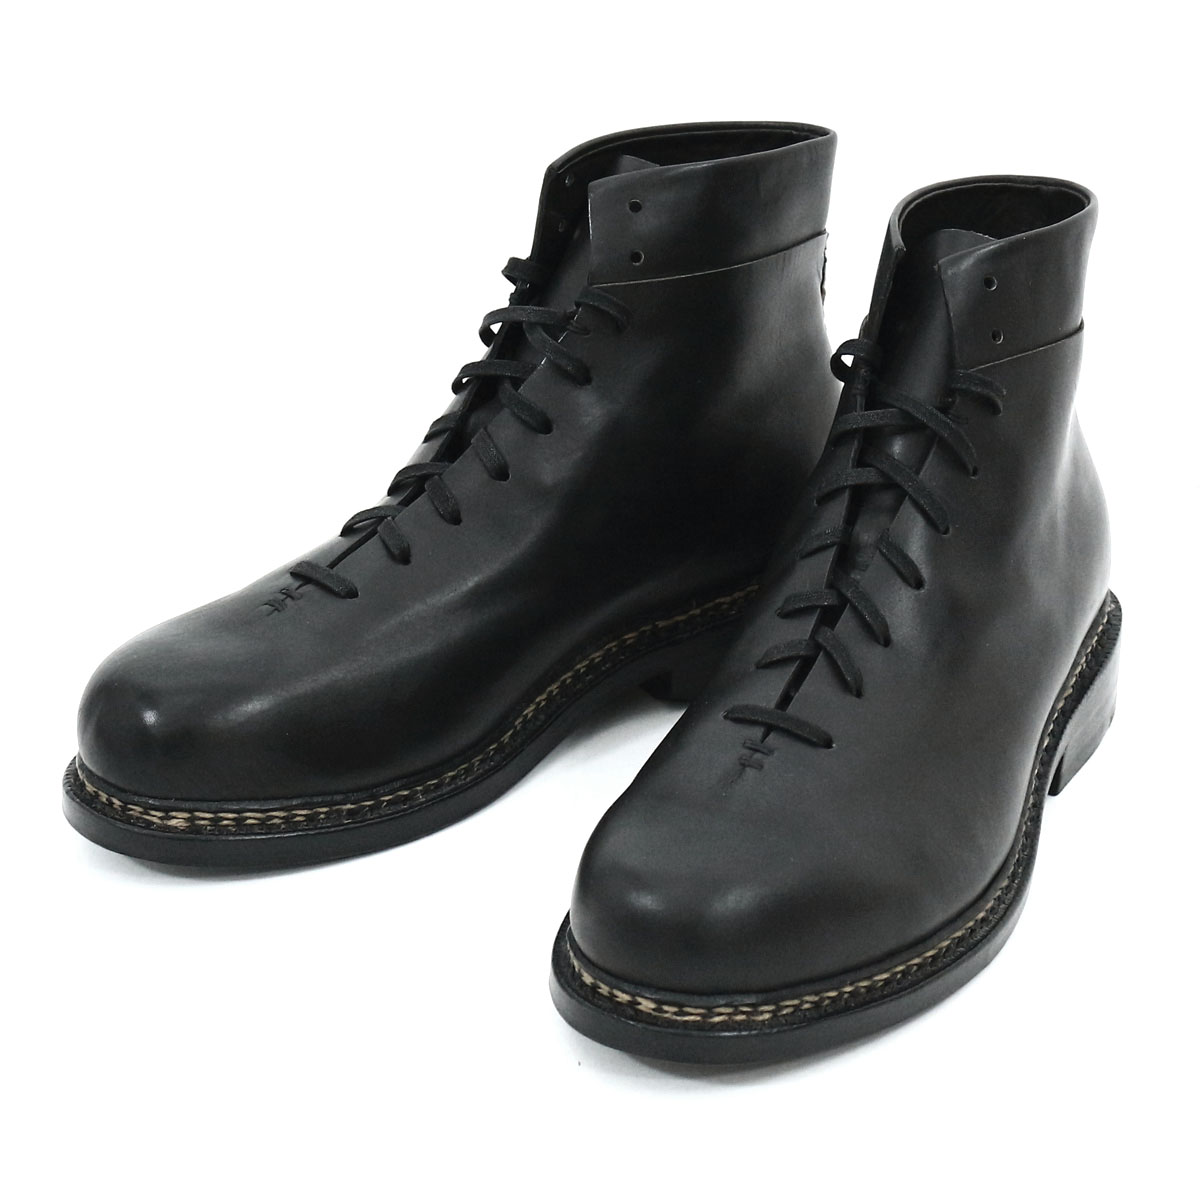 FEIT ファイト 世界84足限定 Braided Lace Up Boot Vegetable Leather ベジタブルレザーレースアップブーツ 942